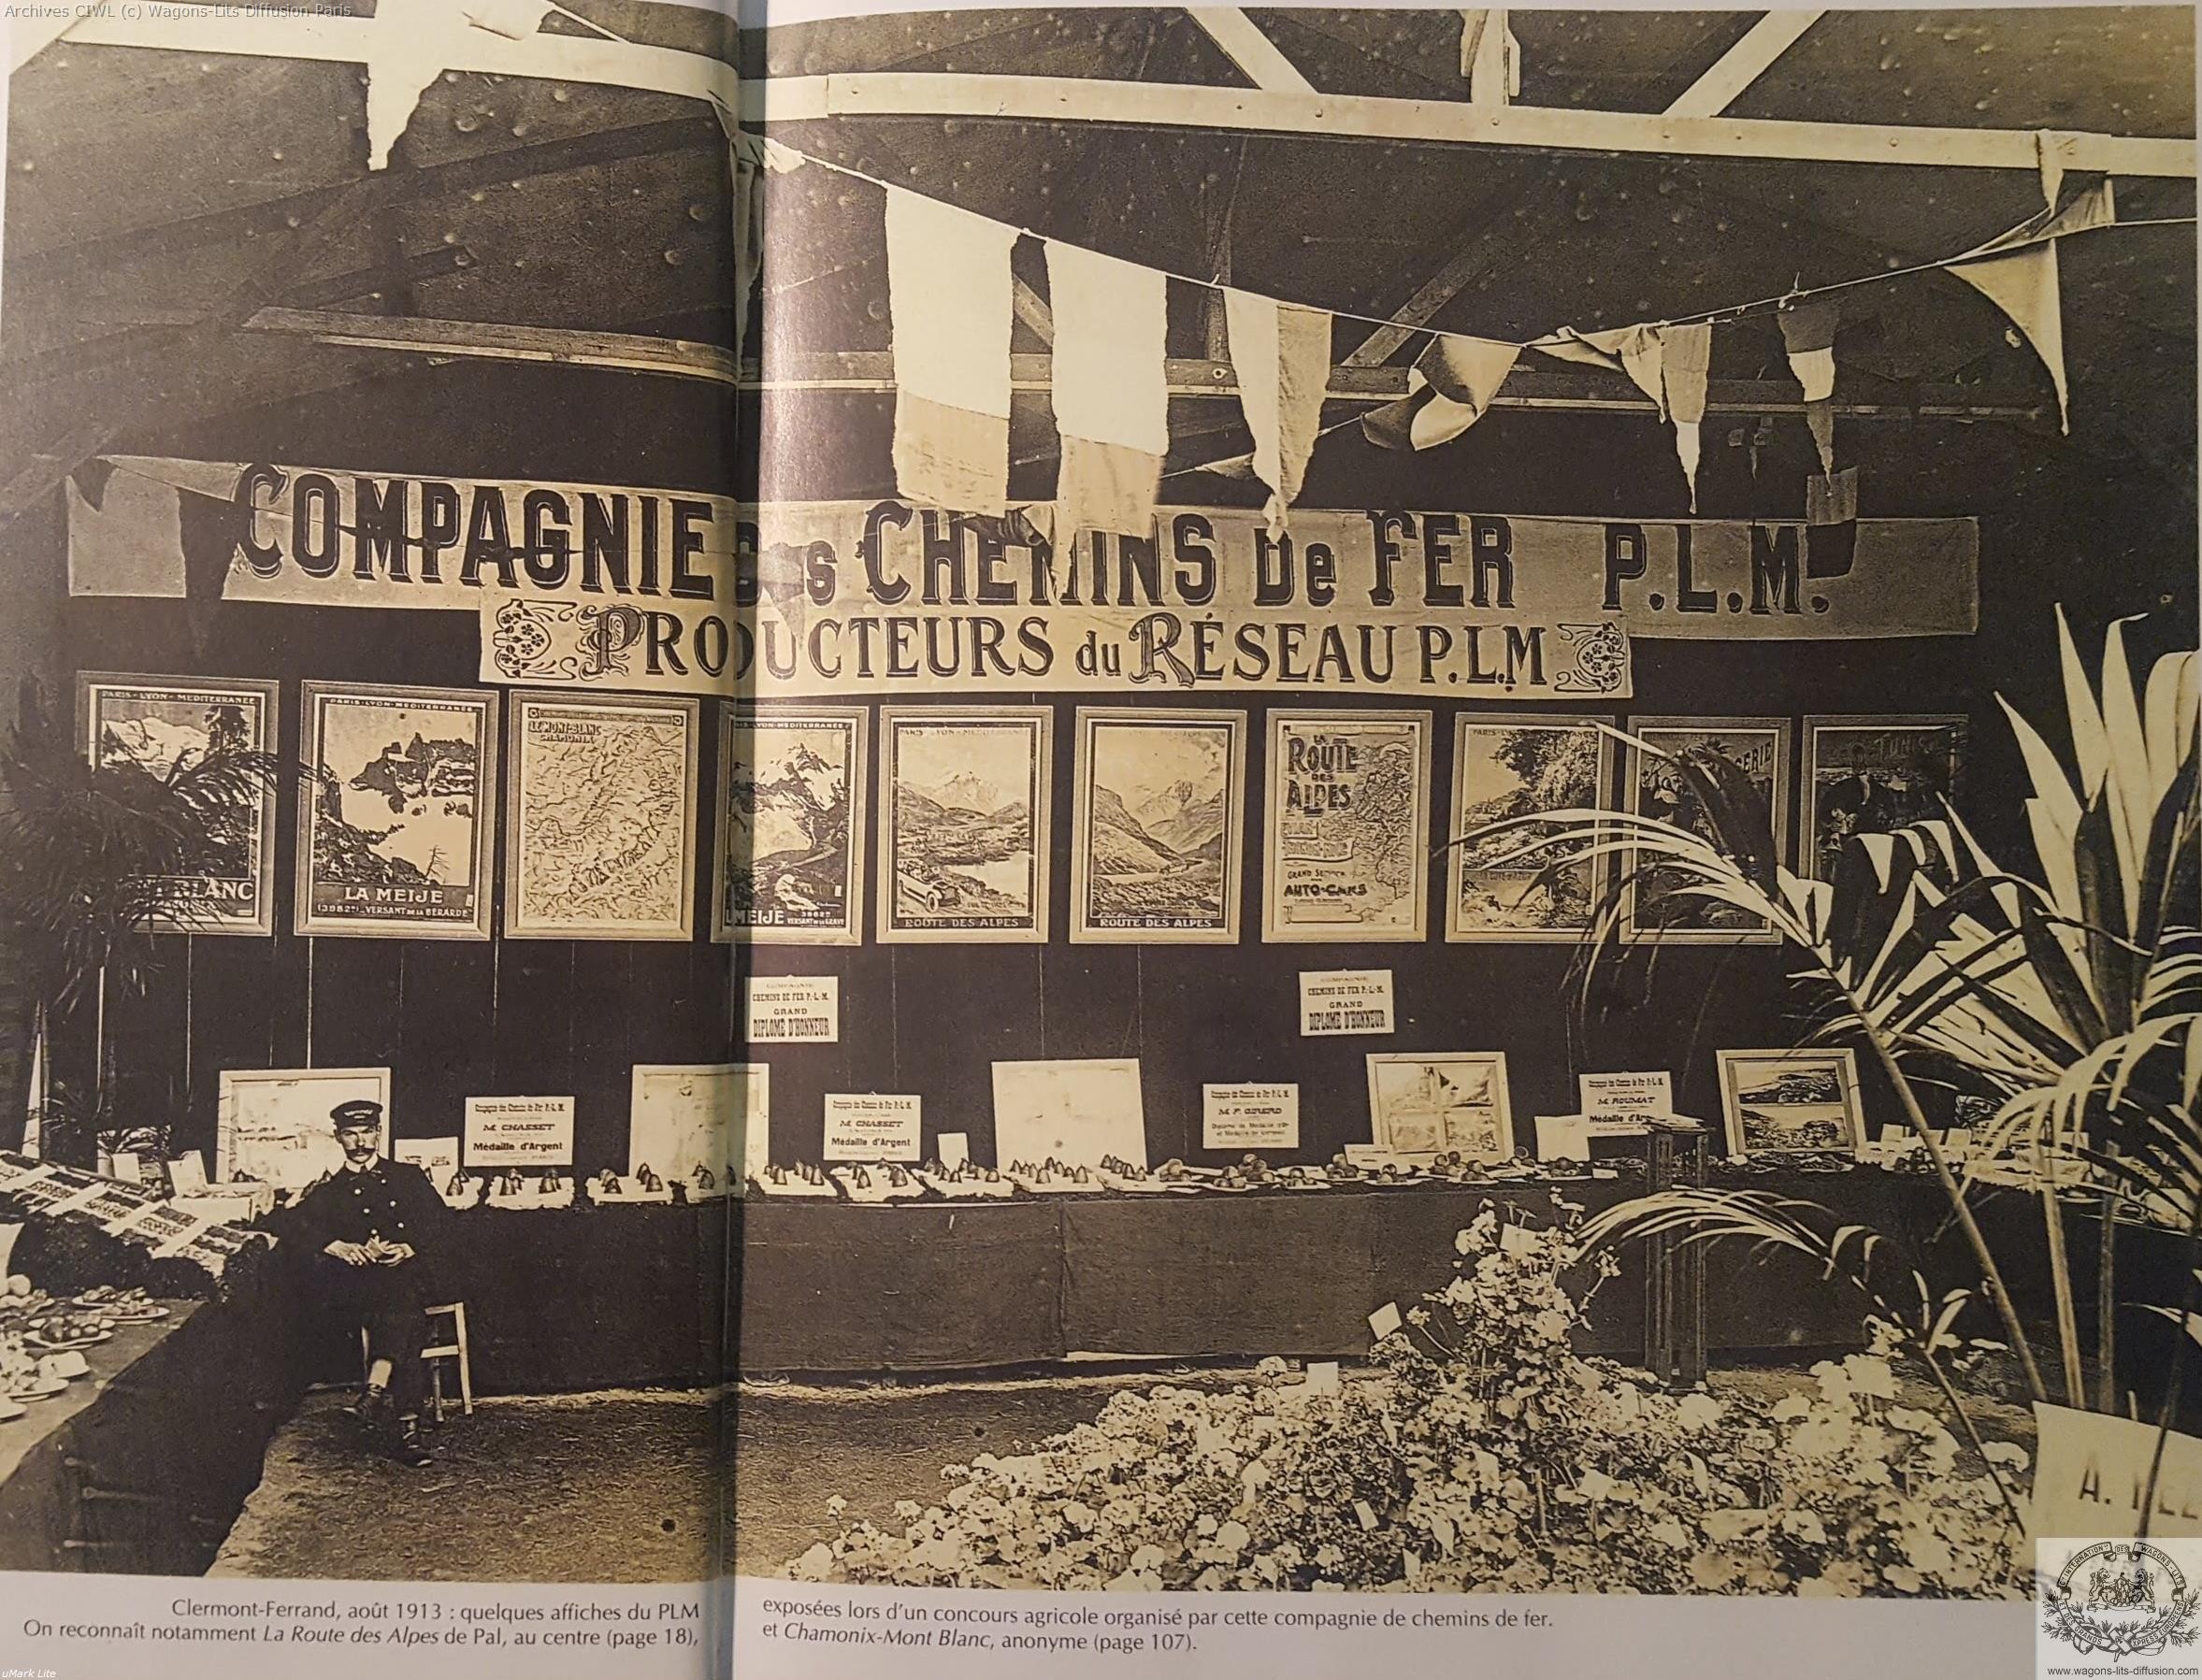 Plm exposition affiches 1913